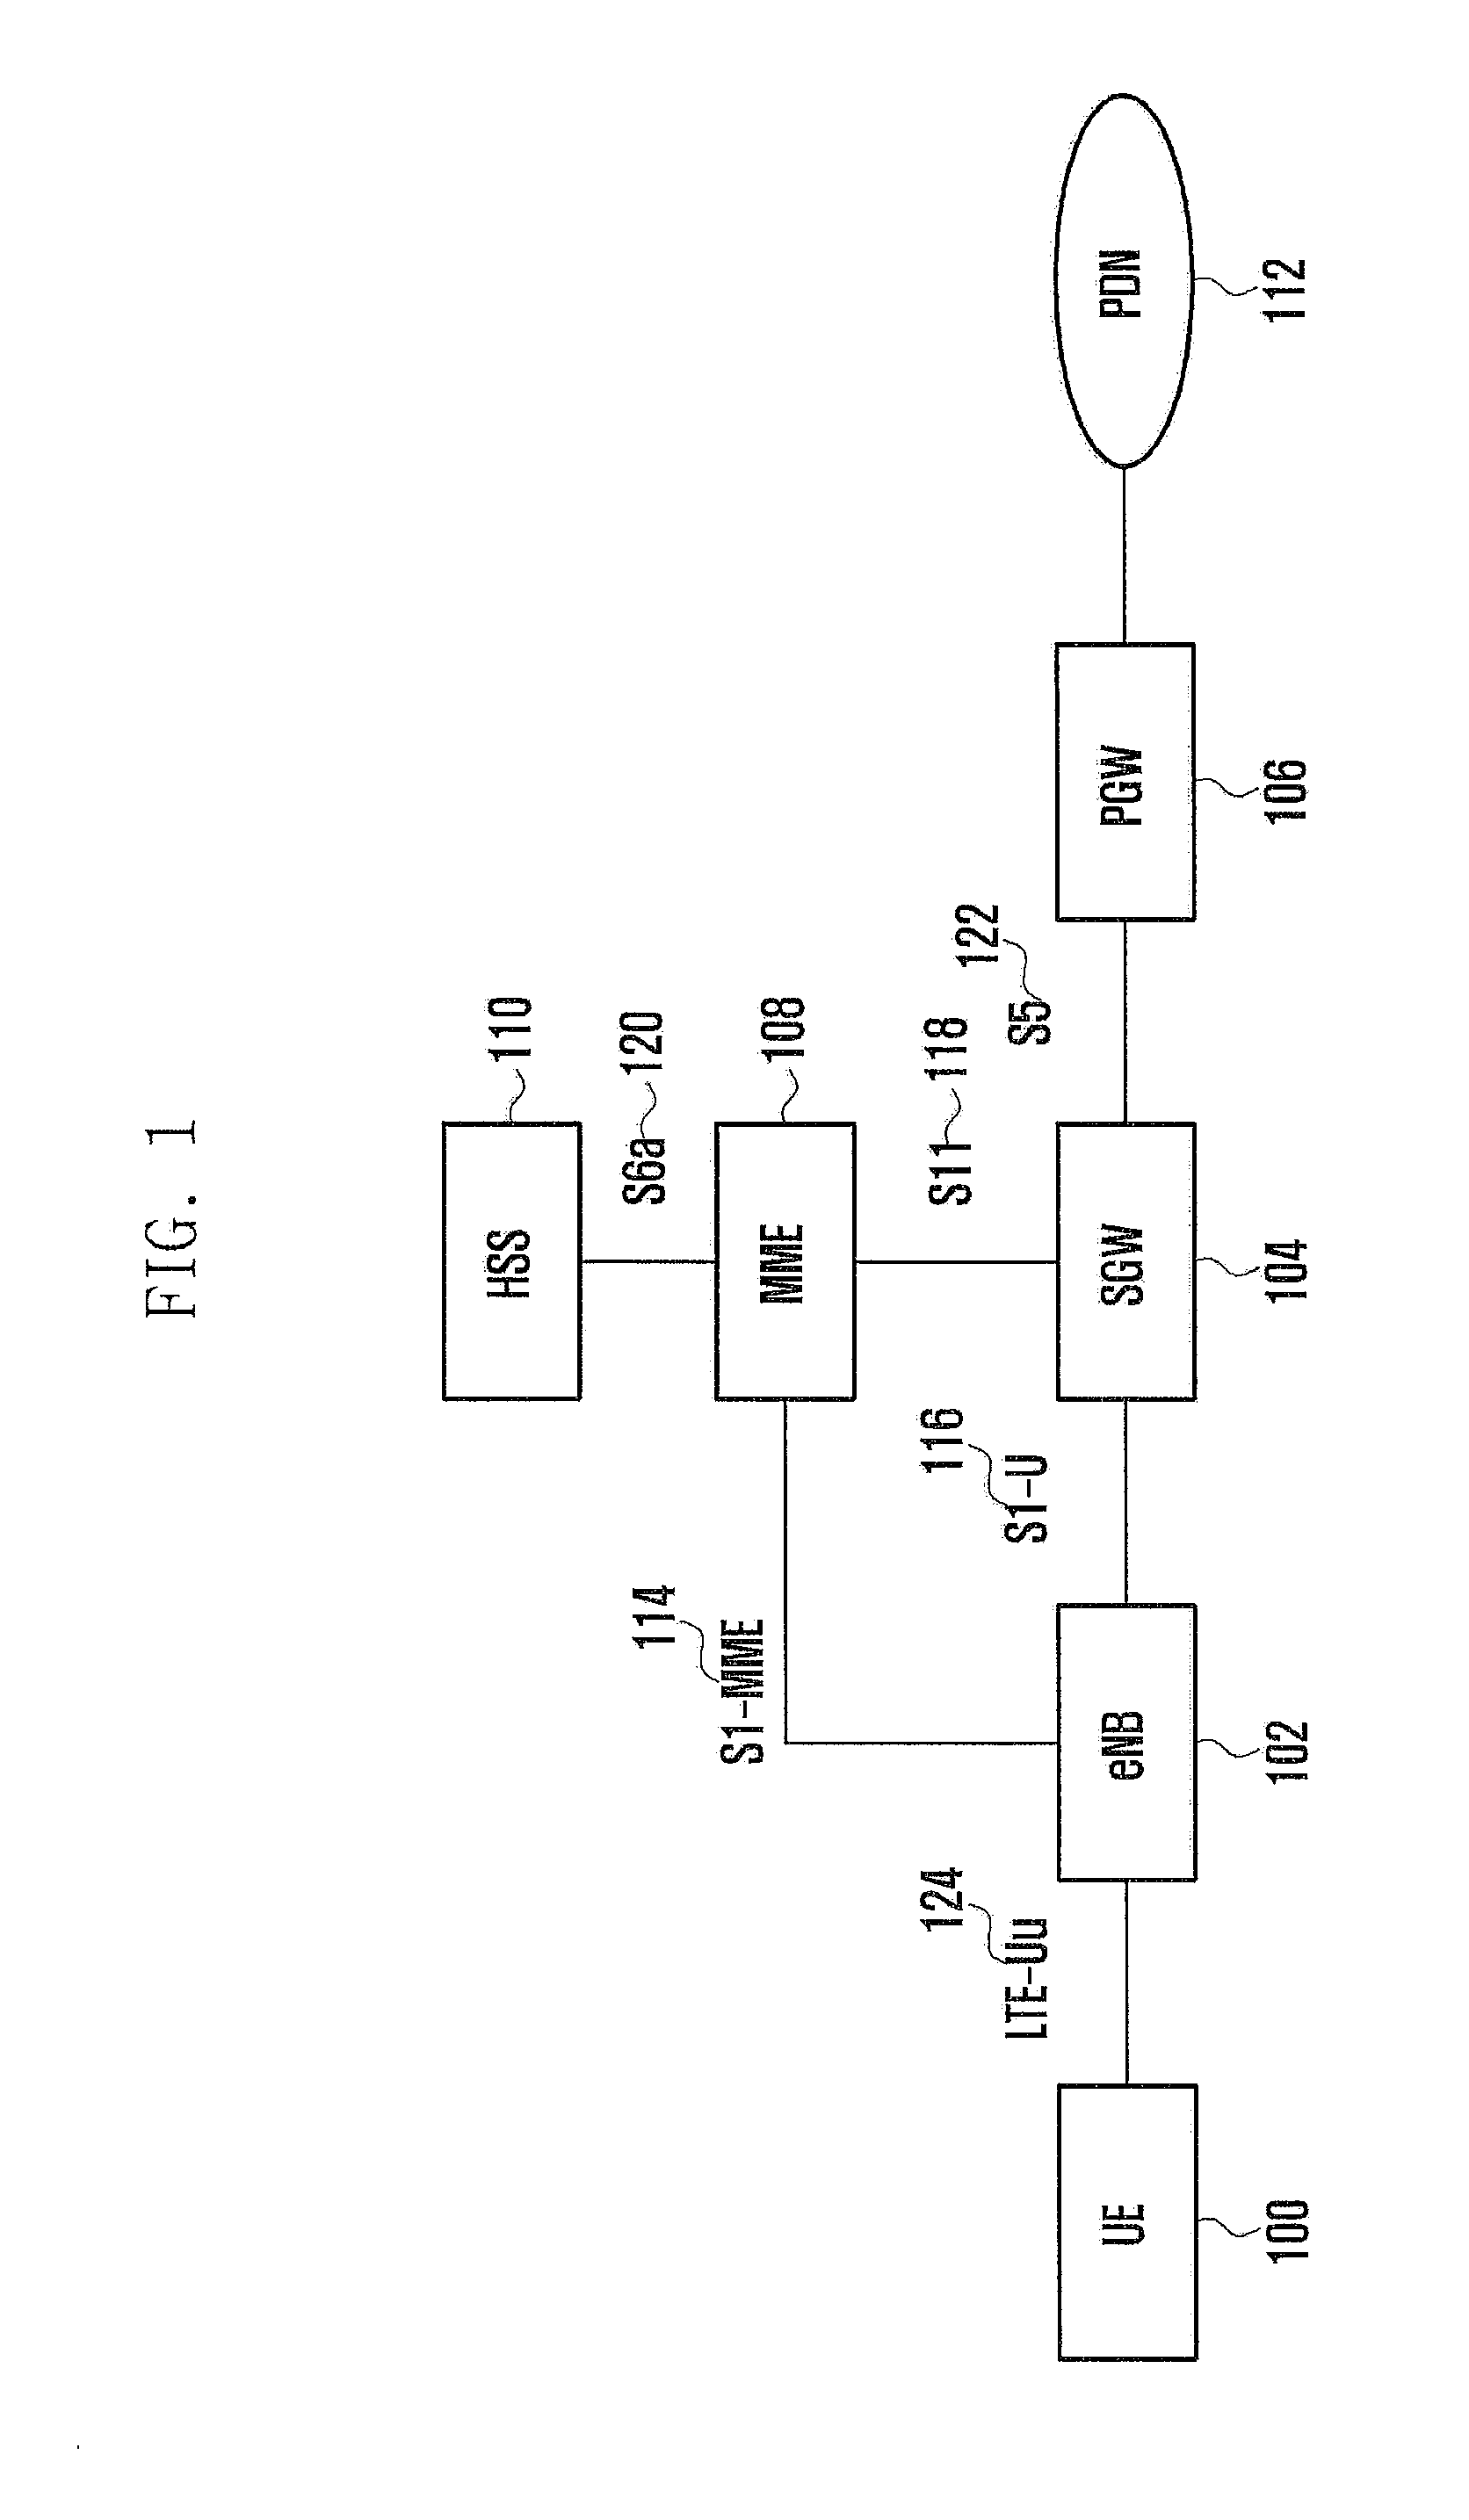 Method and apparatus for efficiently transmitting small amounts of data in wireless communication systems